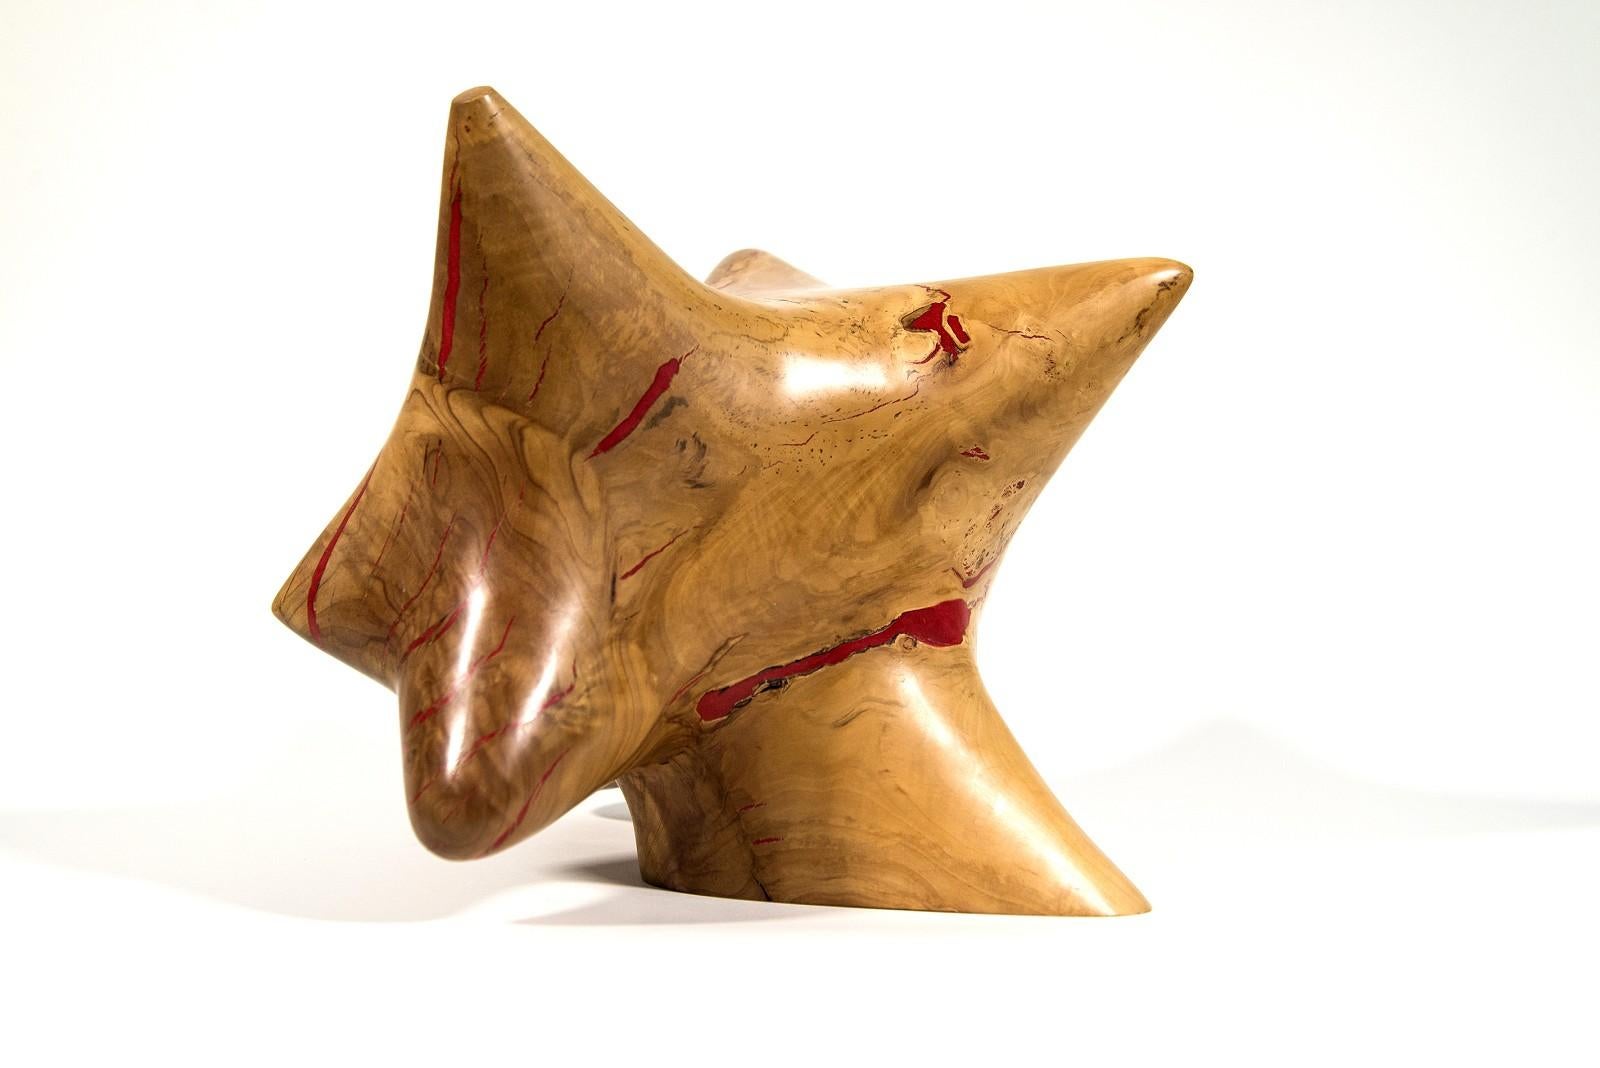 Windfall Series II No 9 - smooth, carved, abstract, Applewood & resin sculpture - Contemporary Sculpture by Shayne Dark